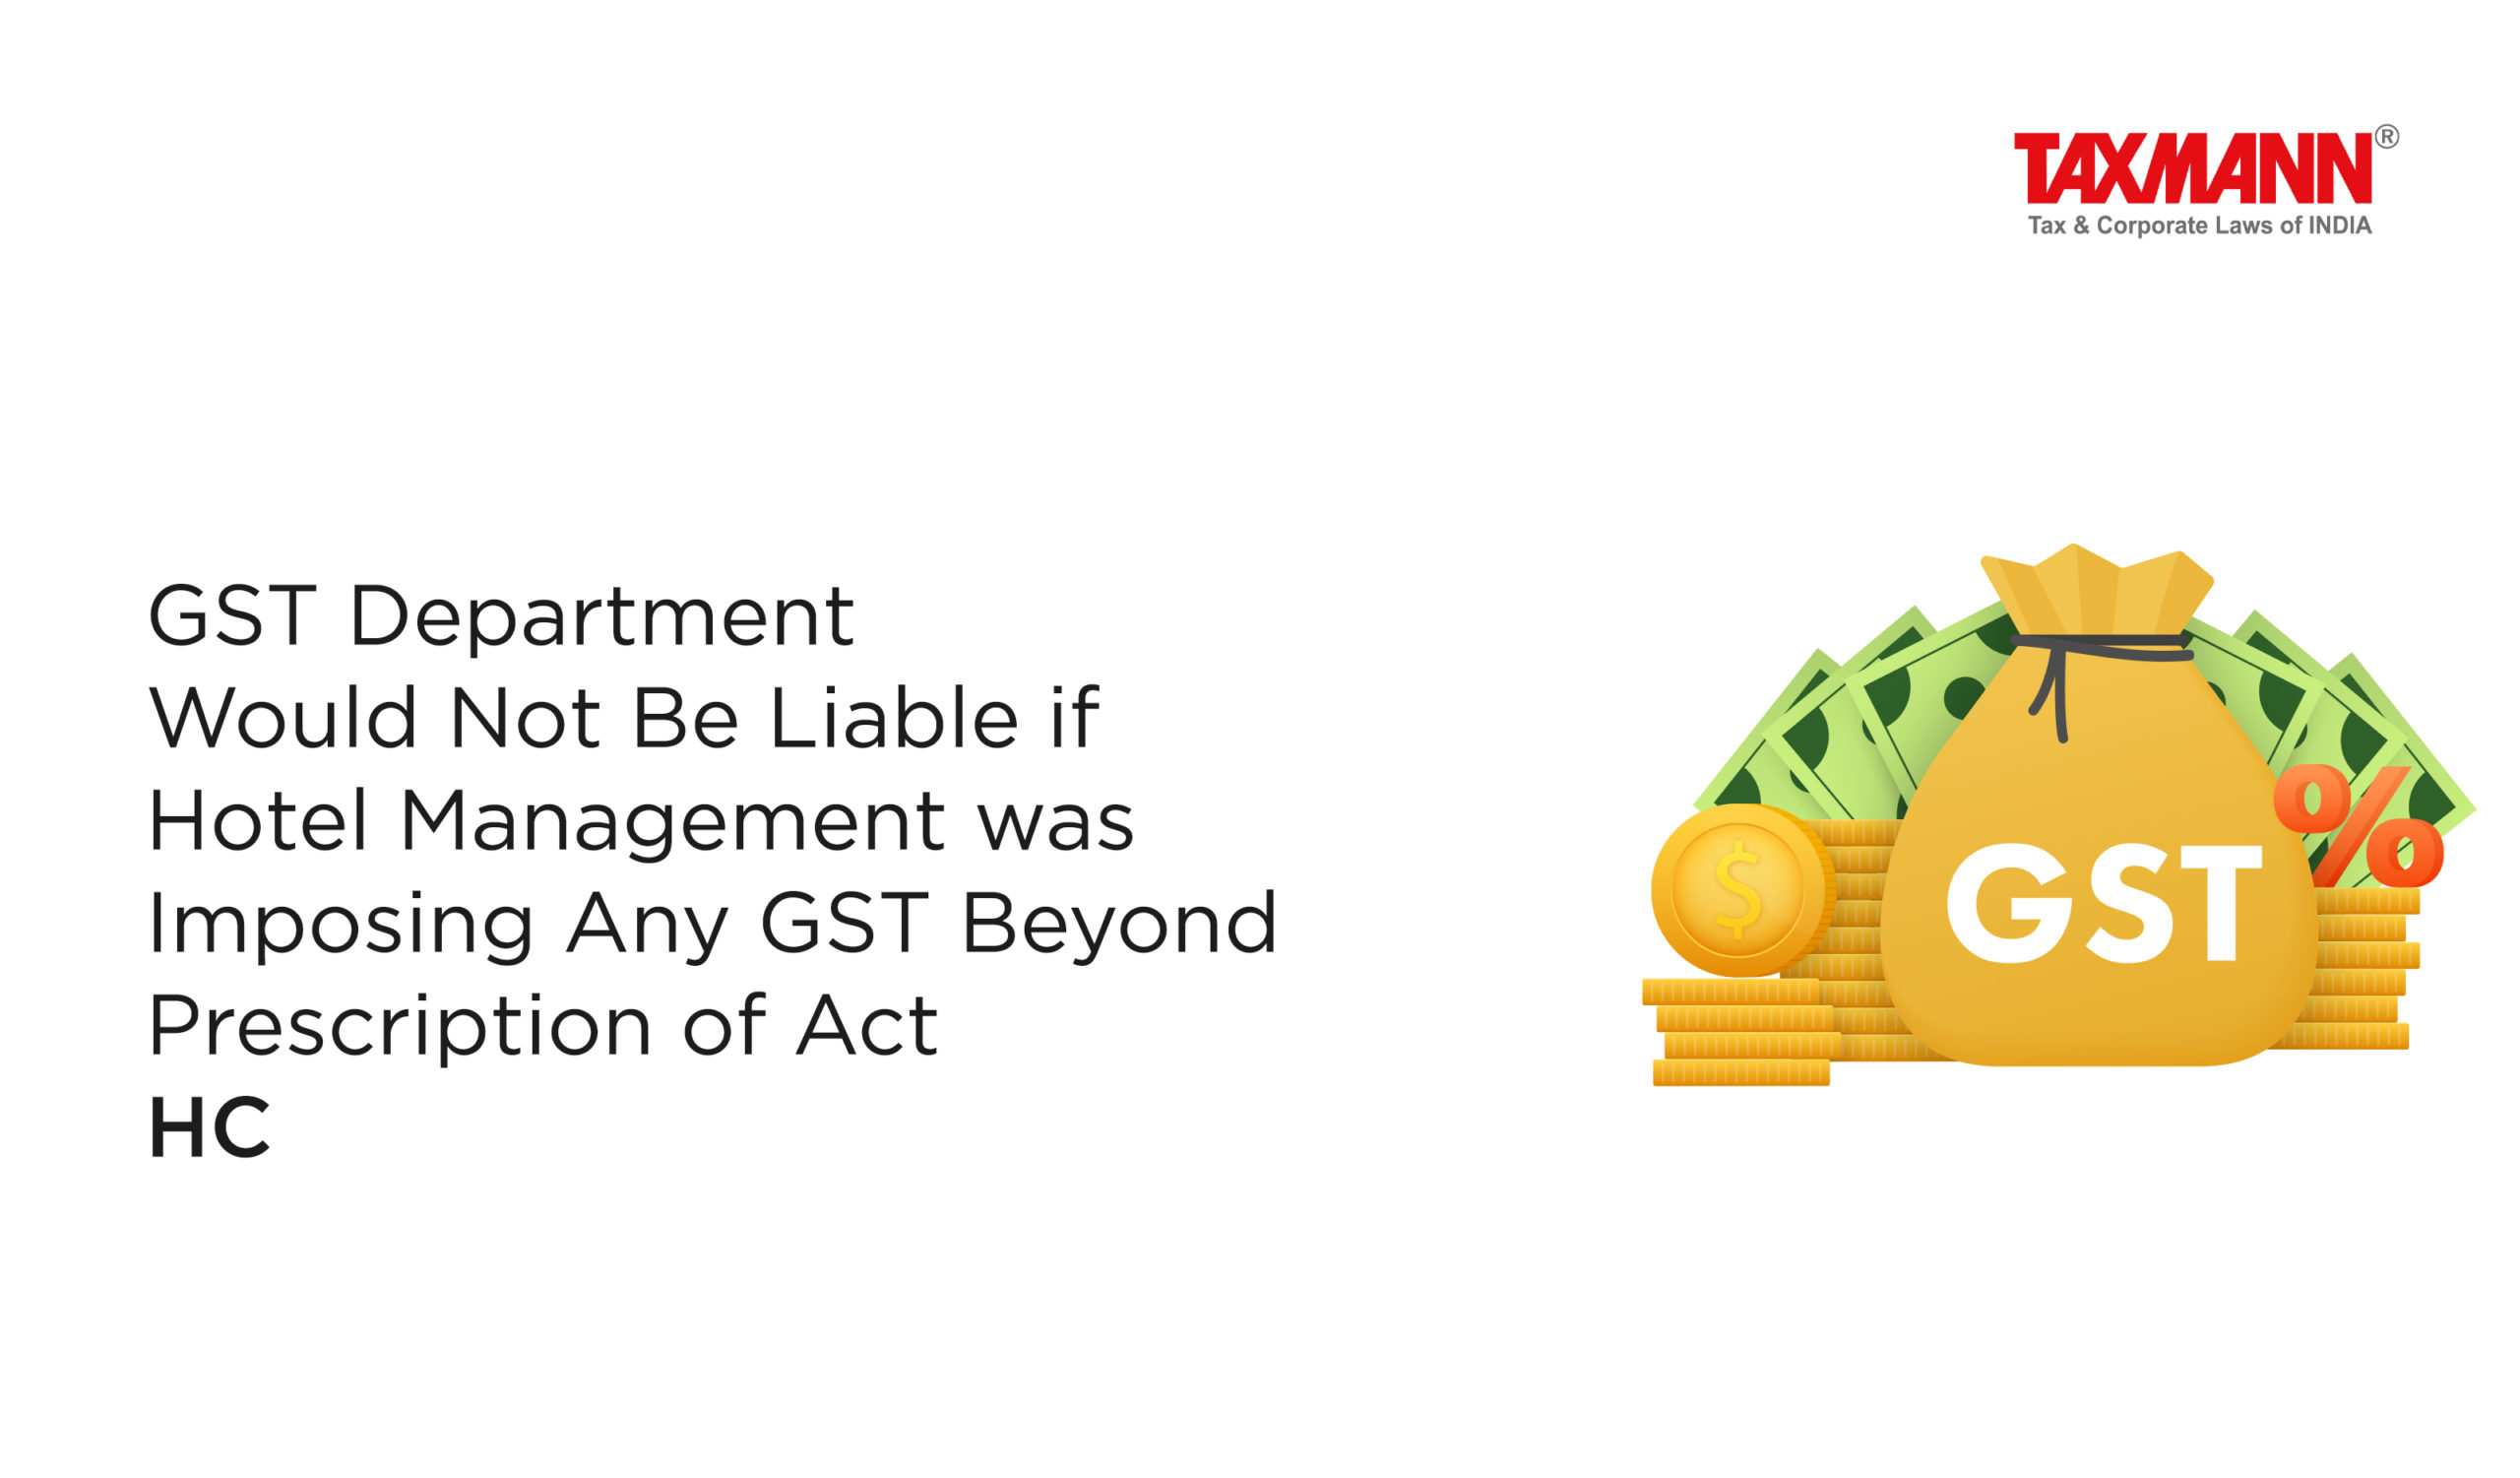 GST imposed by Hotels